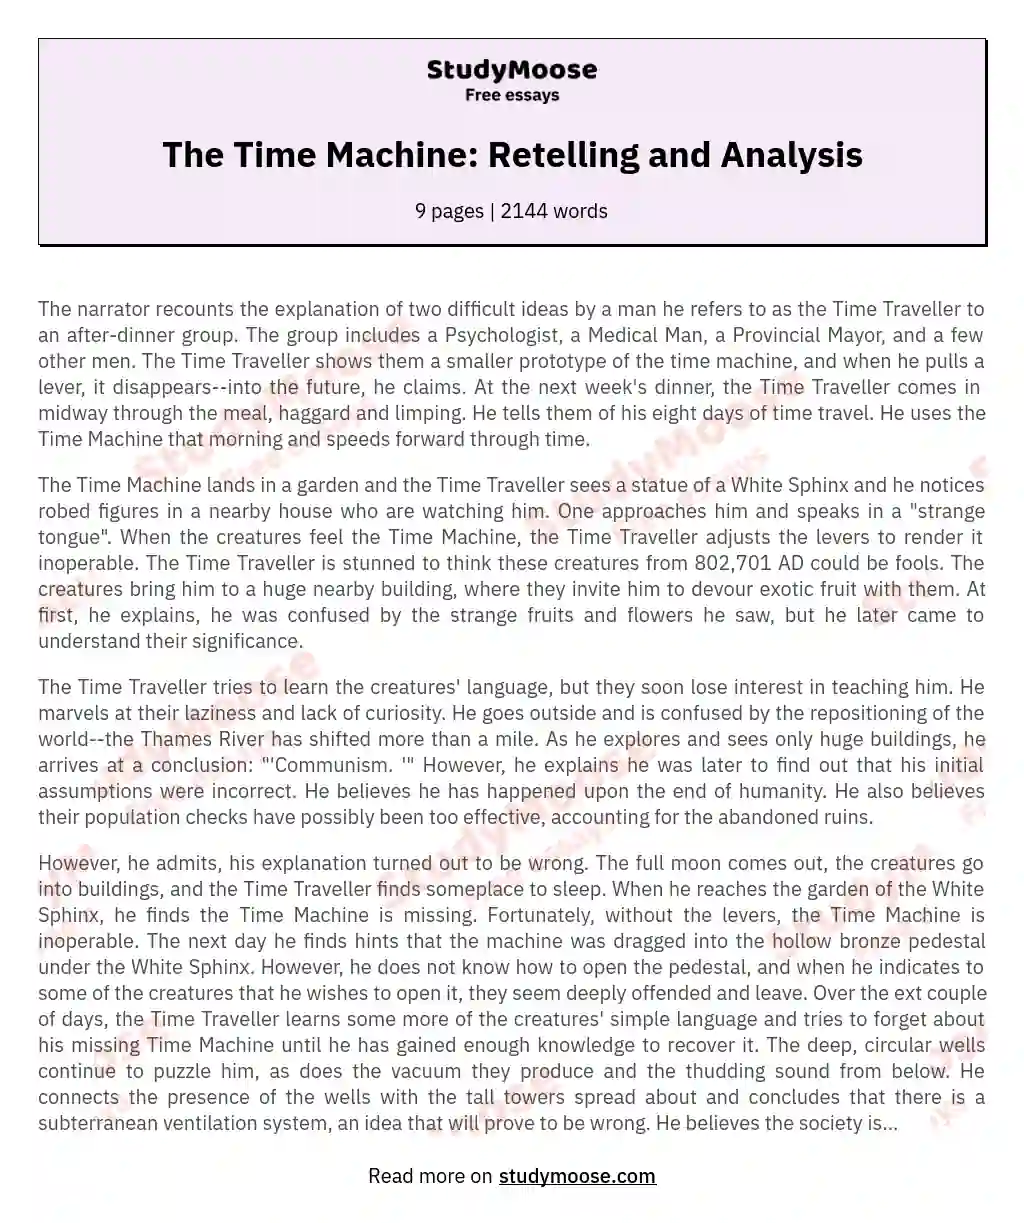 The Time Machine: Retelling and Analysis